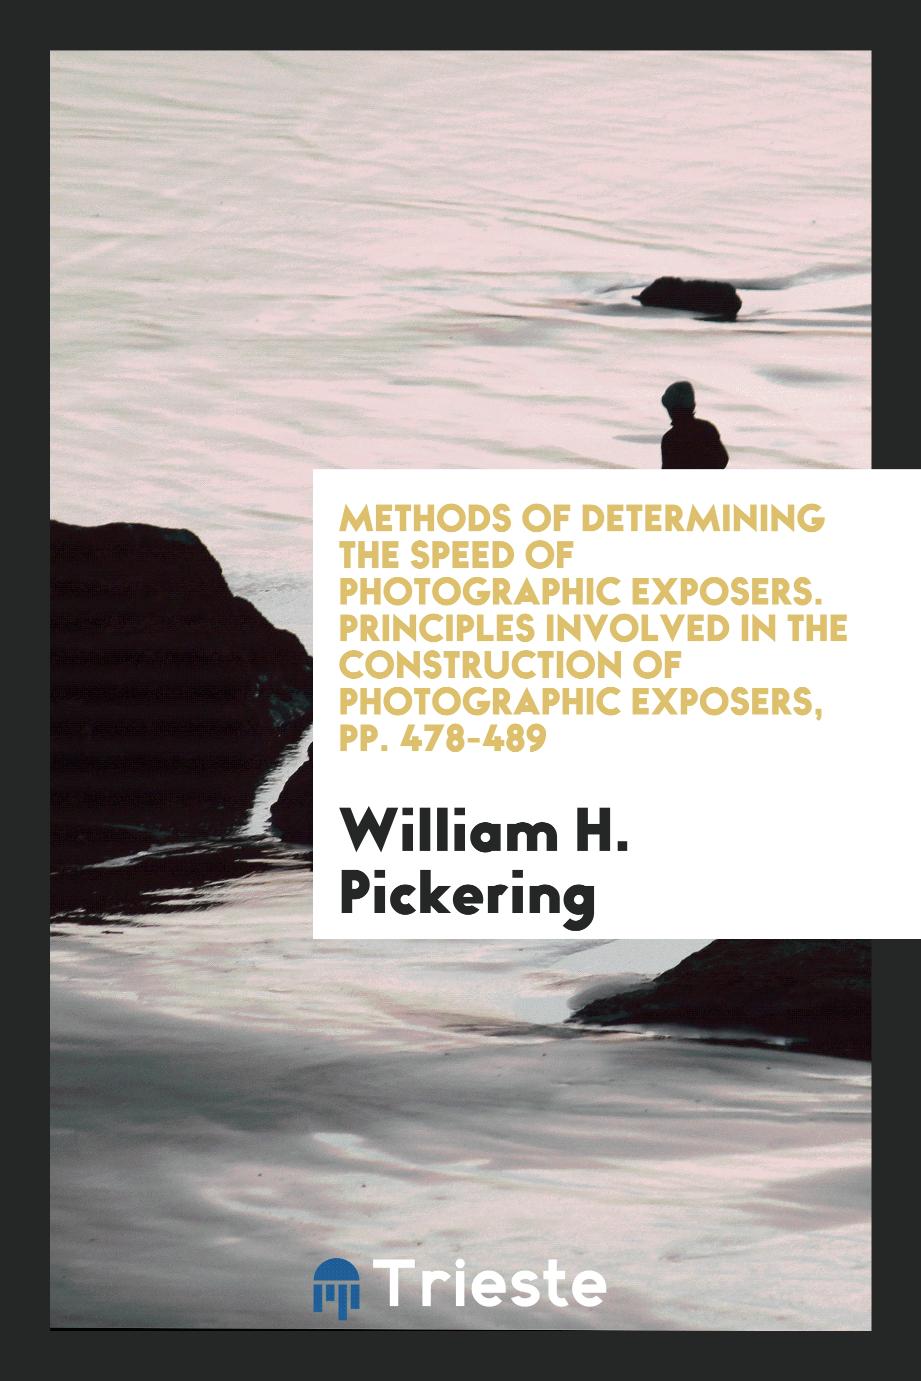 Methods of determining the speed of photographic exposers. Principles involved in the construction of photographic exposers, pp. 478-489